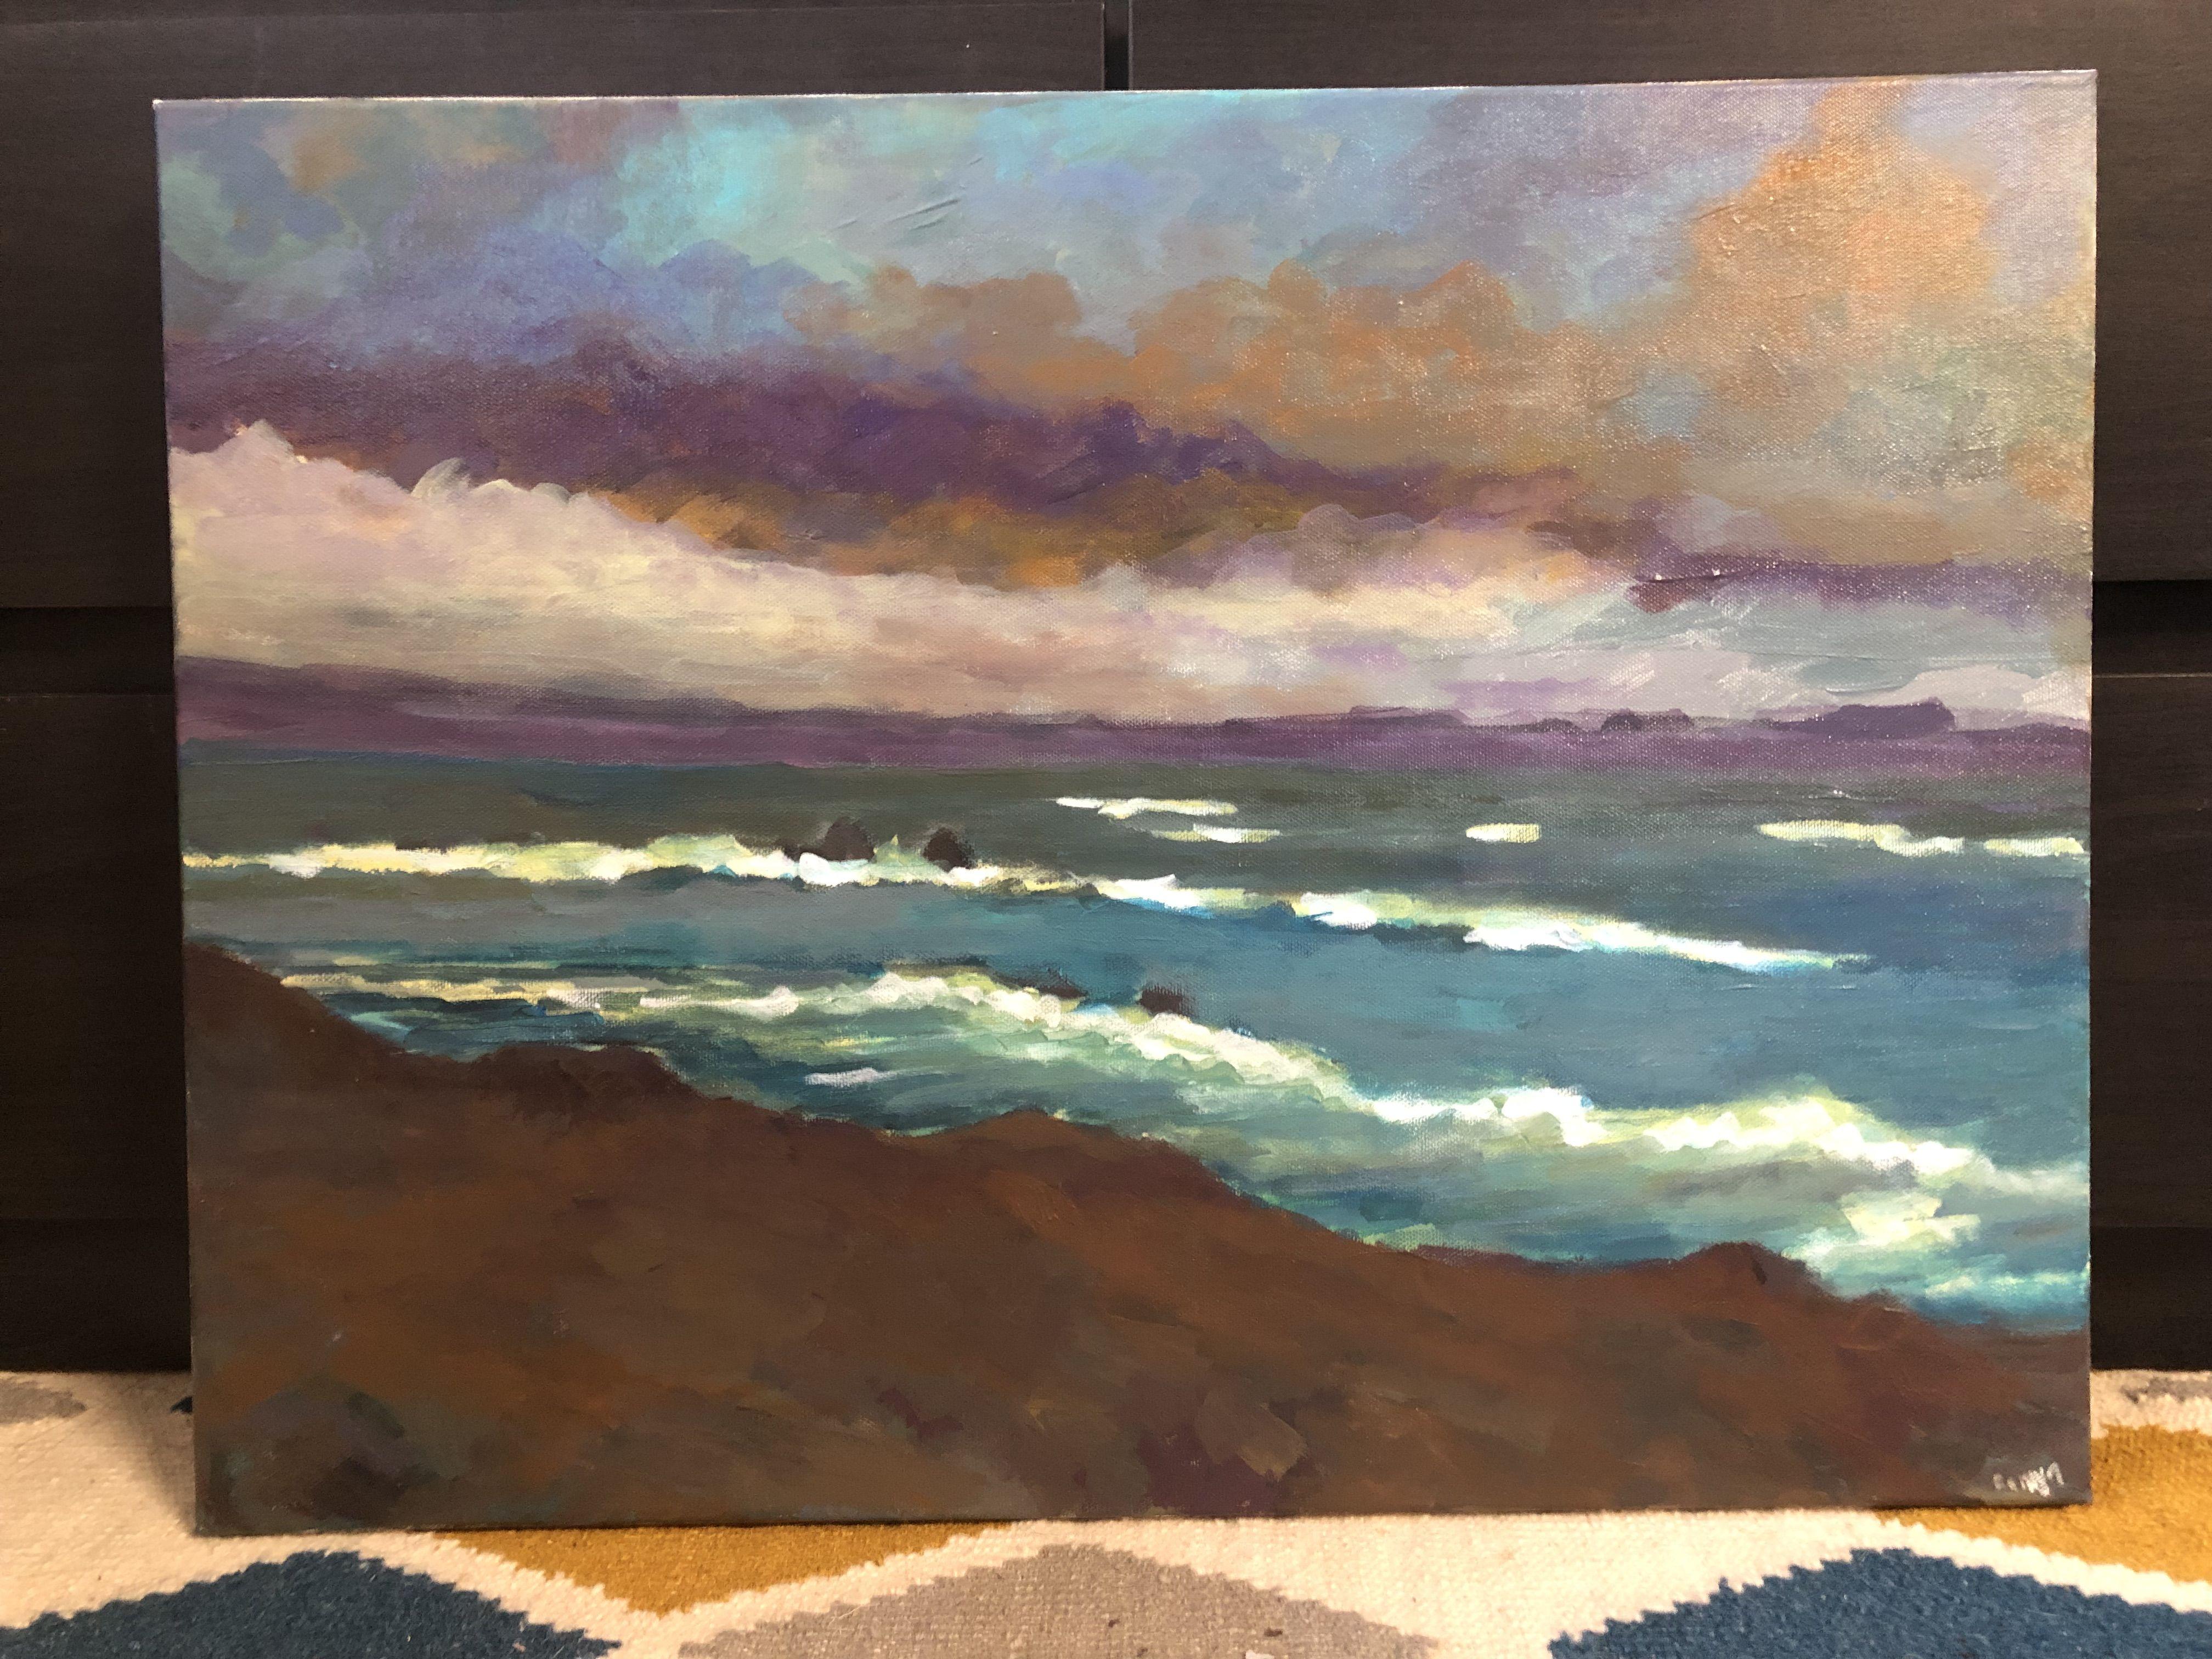 Cloudy days over Carmel , the beach amazes you with its colors. :: Painting :: Impressionist :: This piece comes with an official certificate of authenticity signed by the artist :: Ready to Hang: No :: Signed: Yes :: Signature Location: bottom